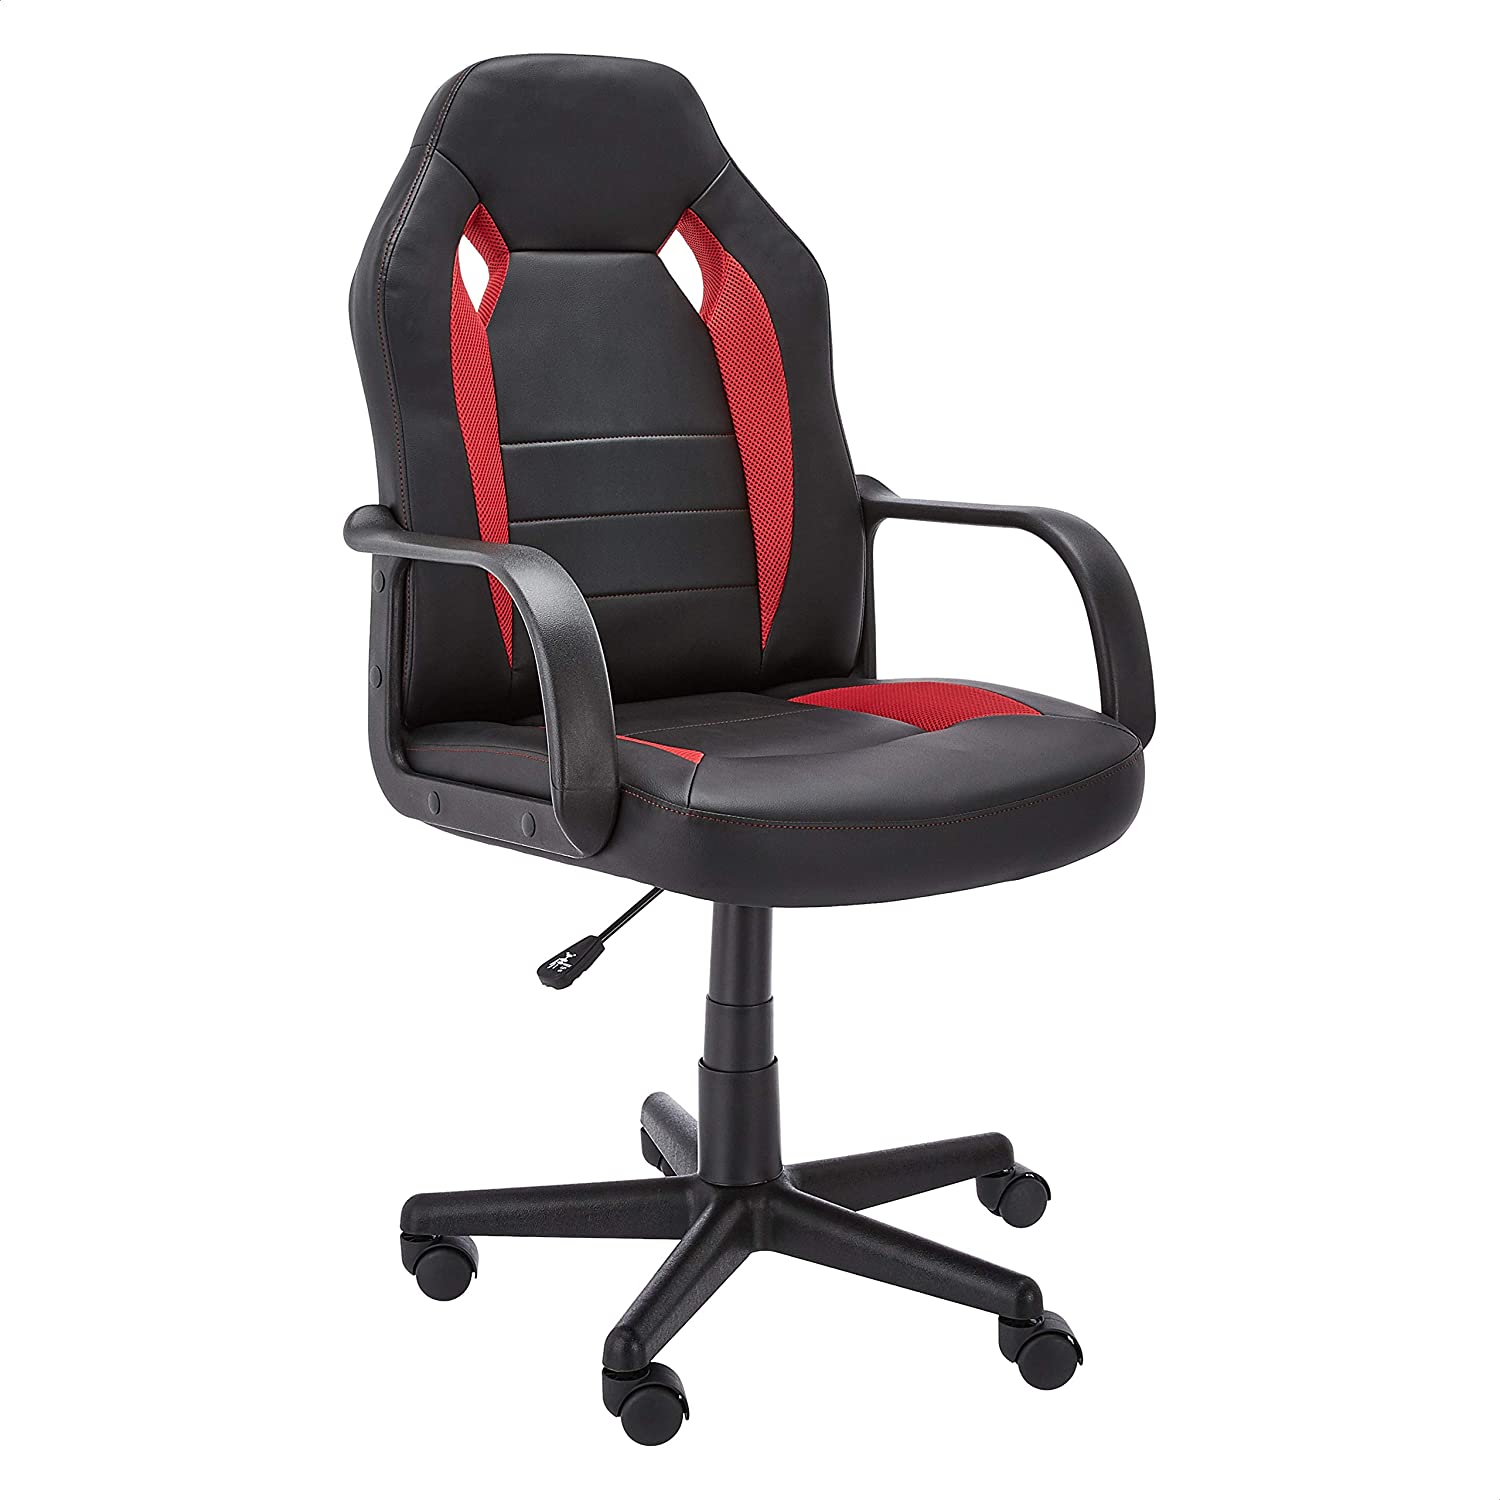 Amazon Basics Racing/Gaming Style Office Chair -Faux [...]